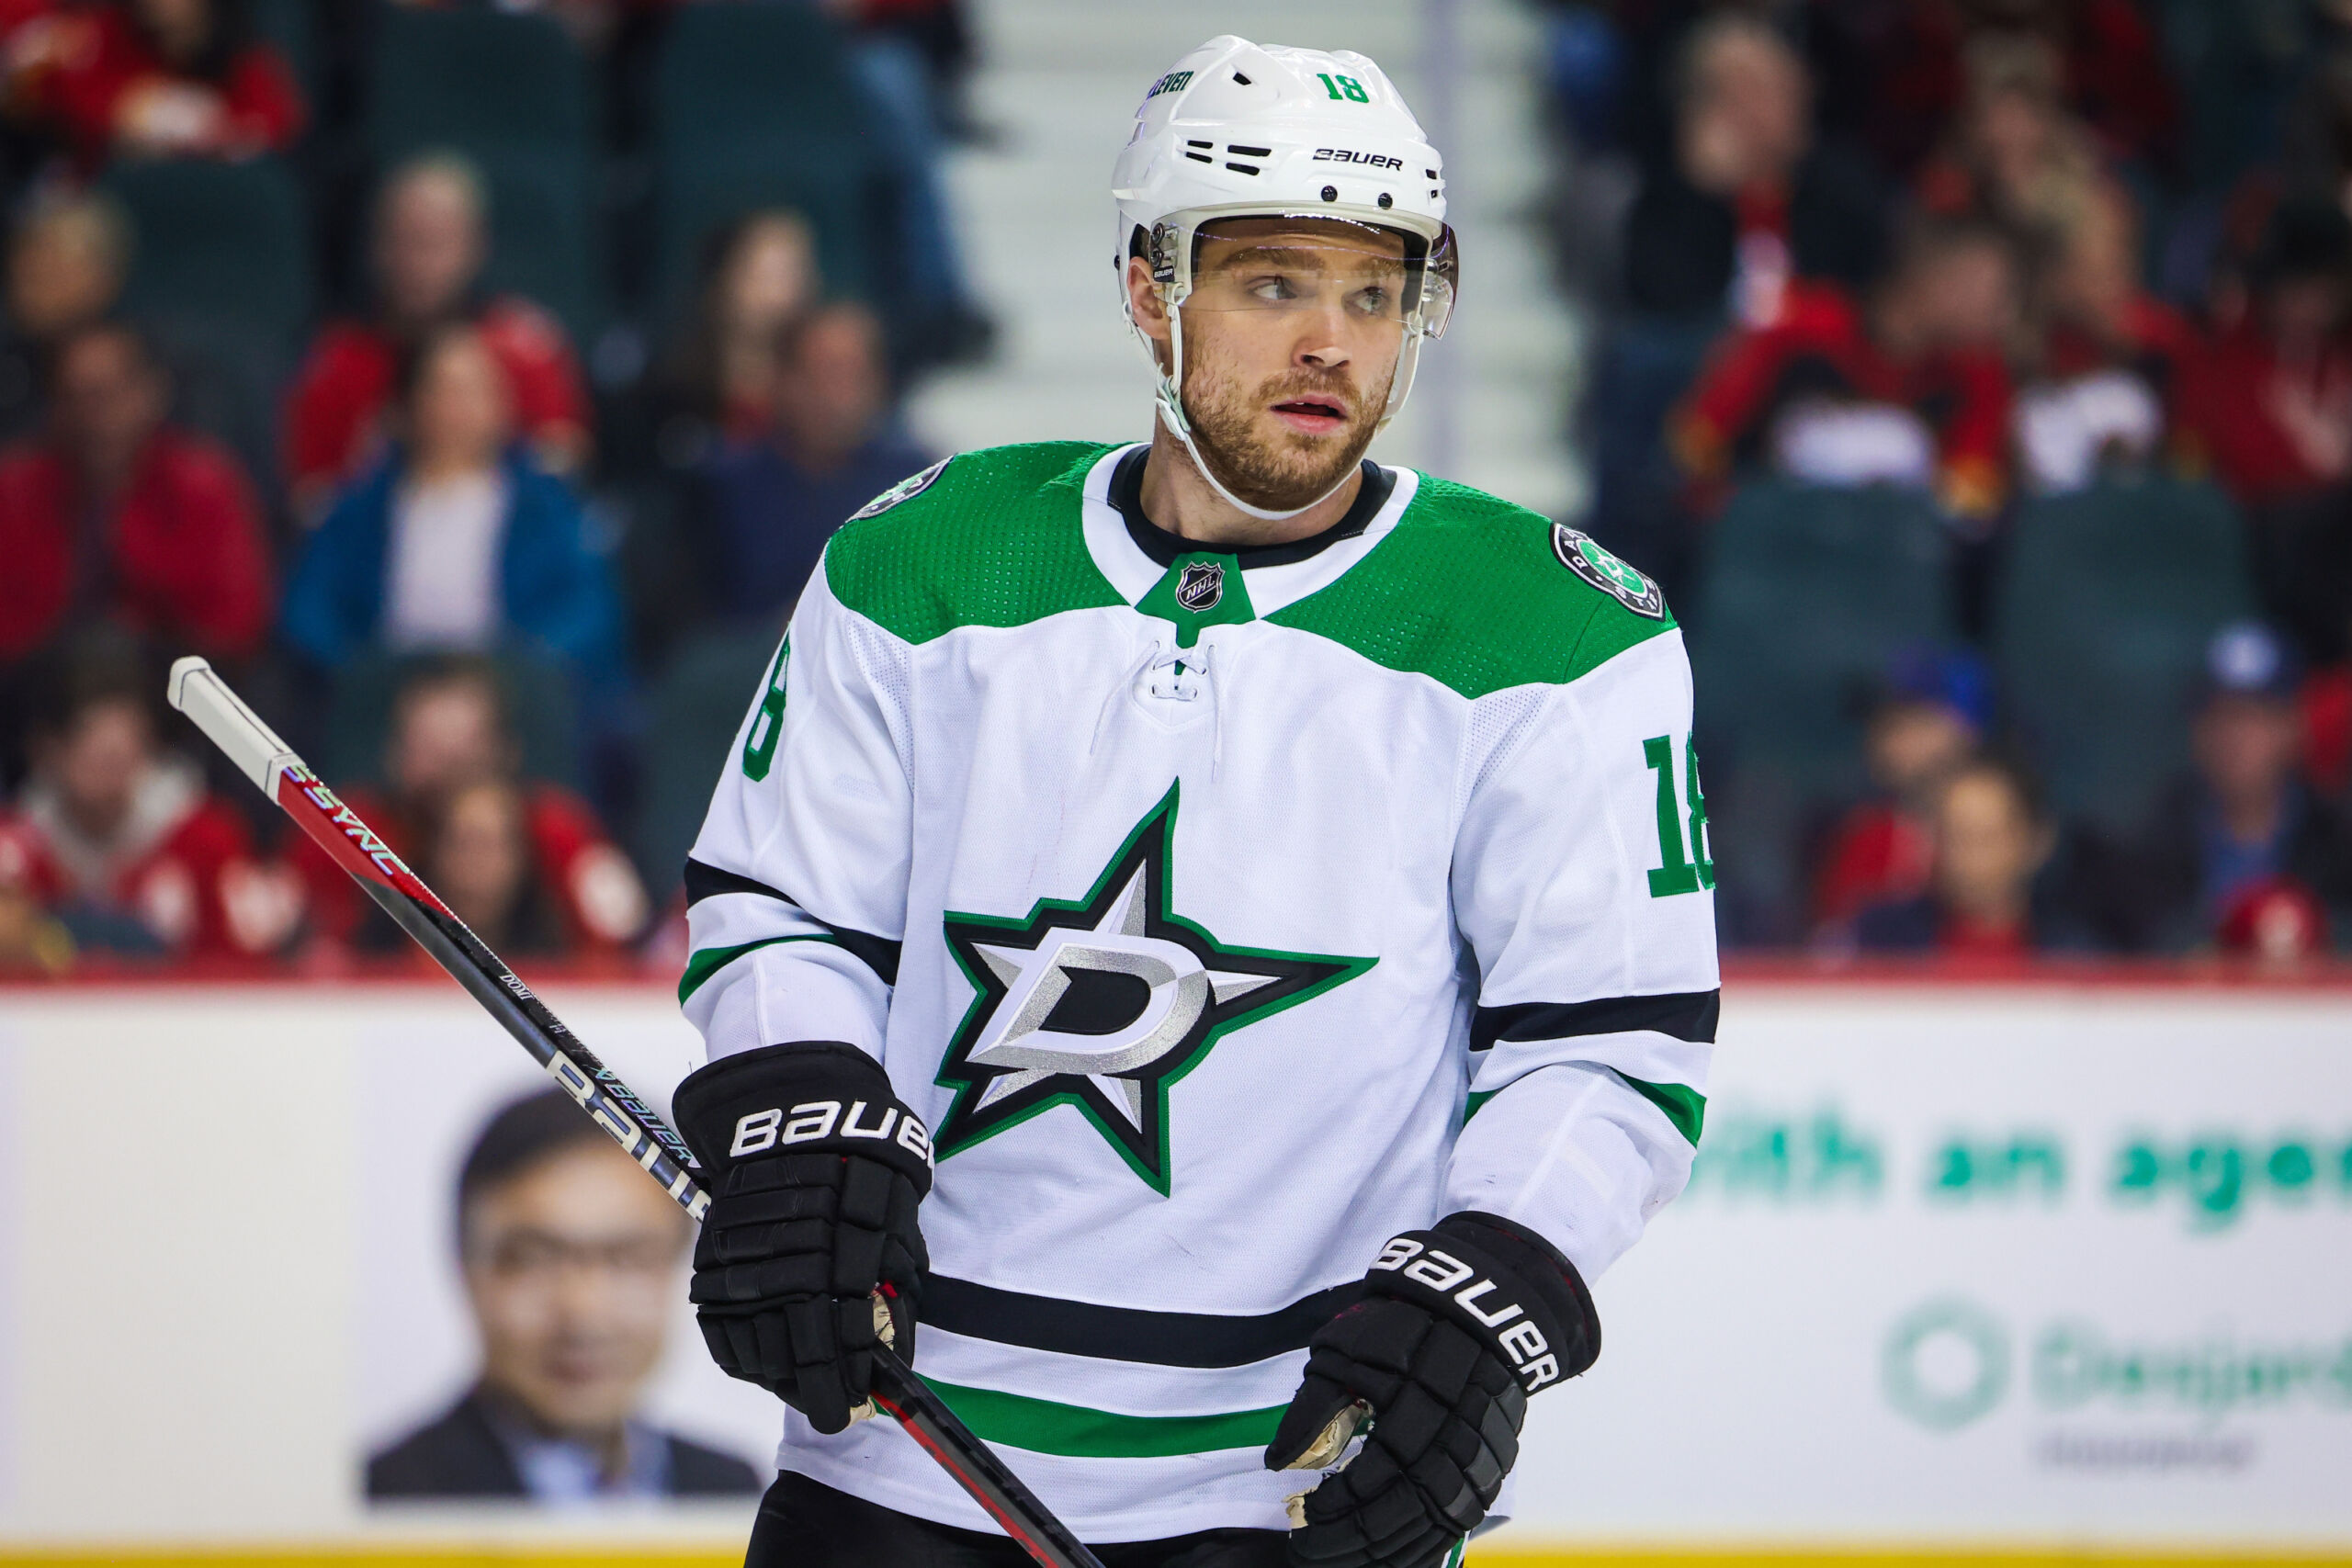 Max Domi of the Dallas Stars warms up before the game against the